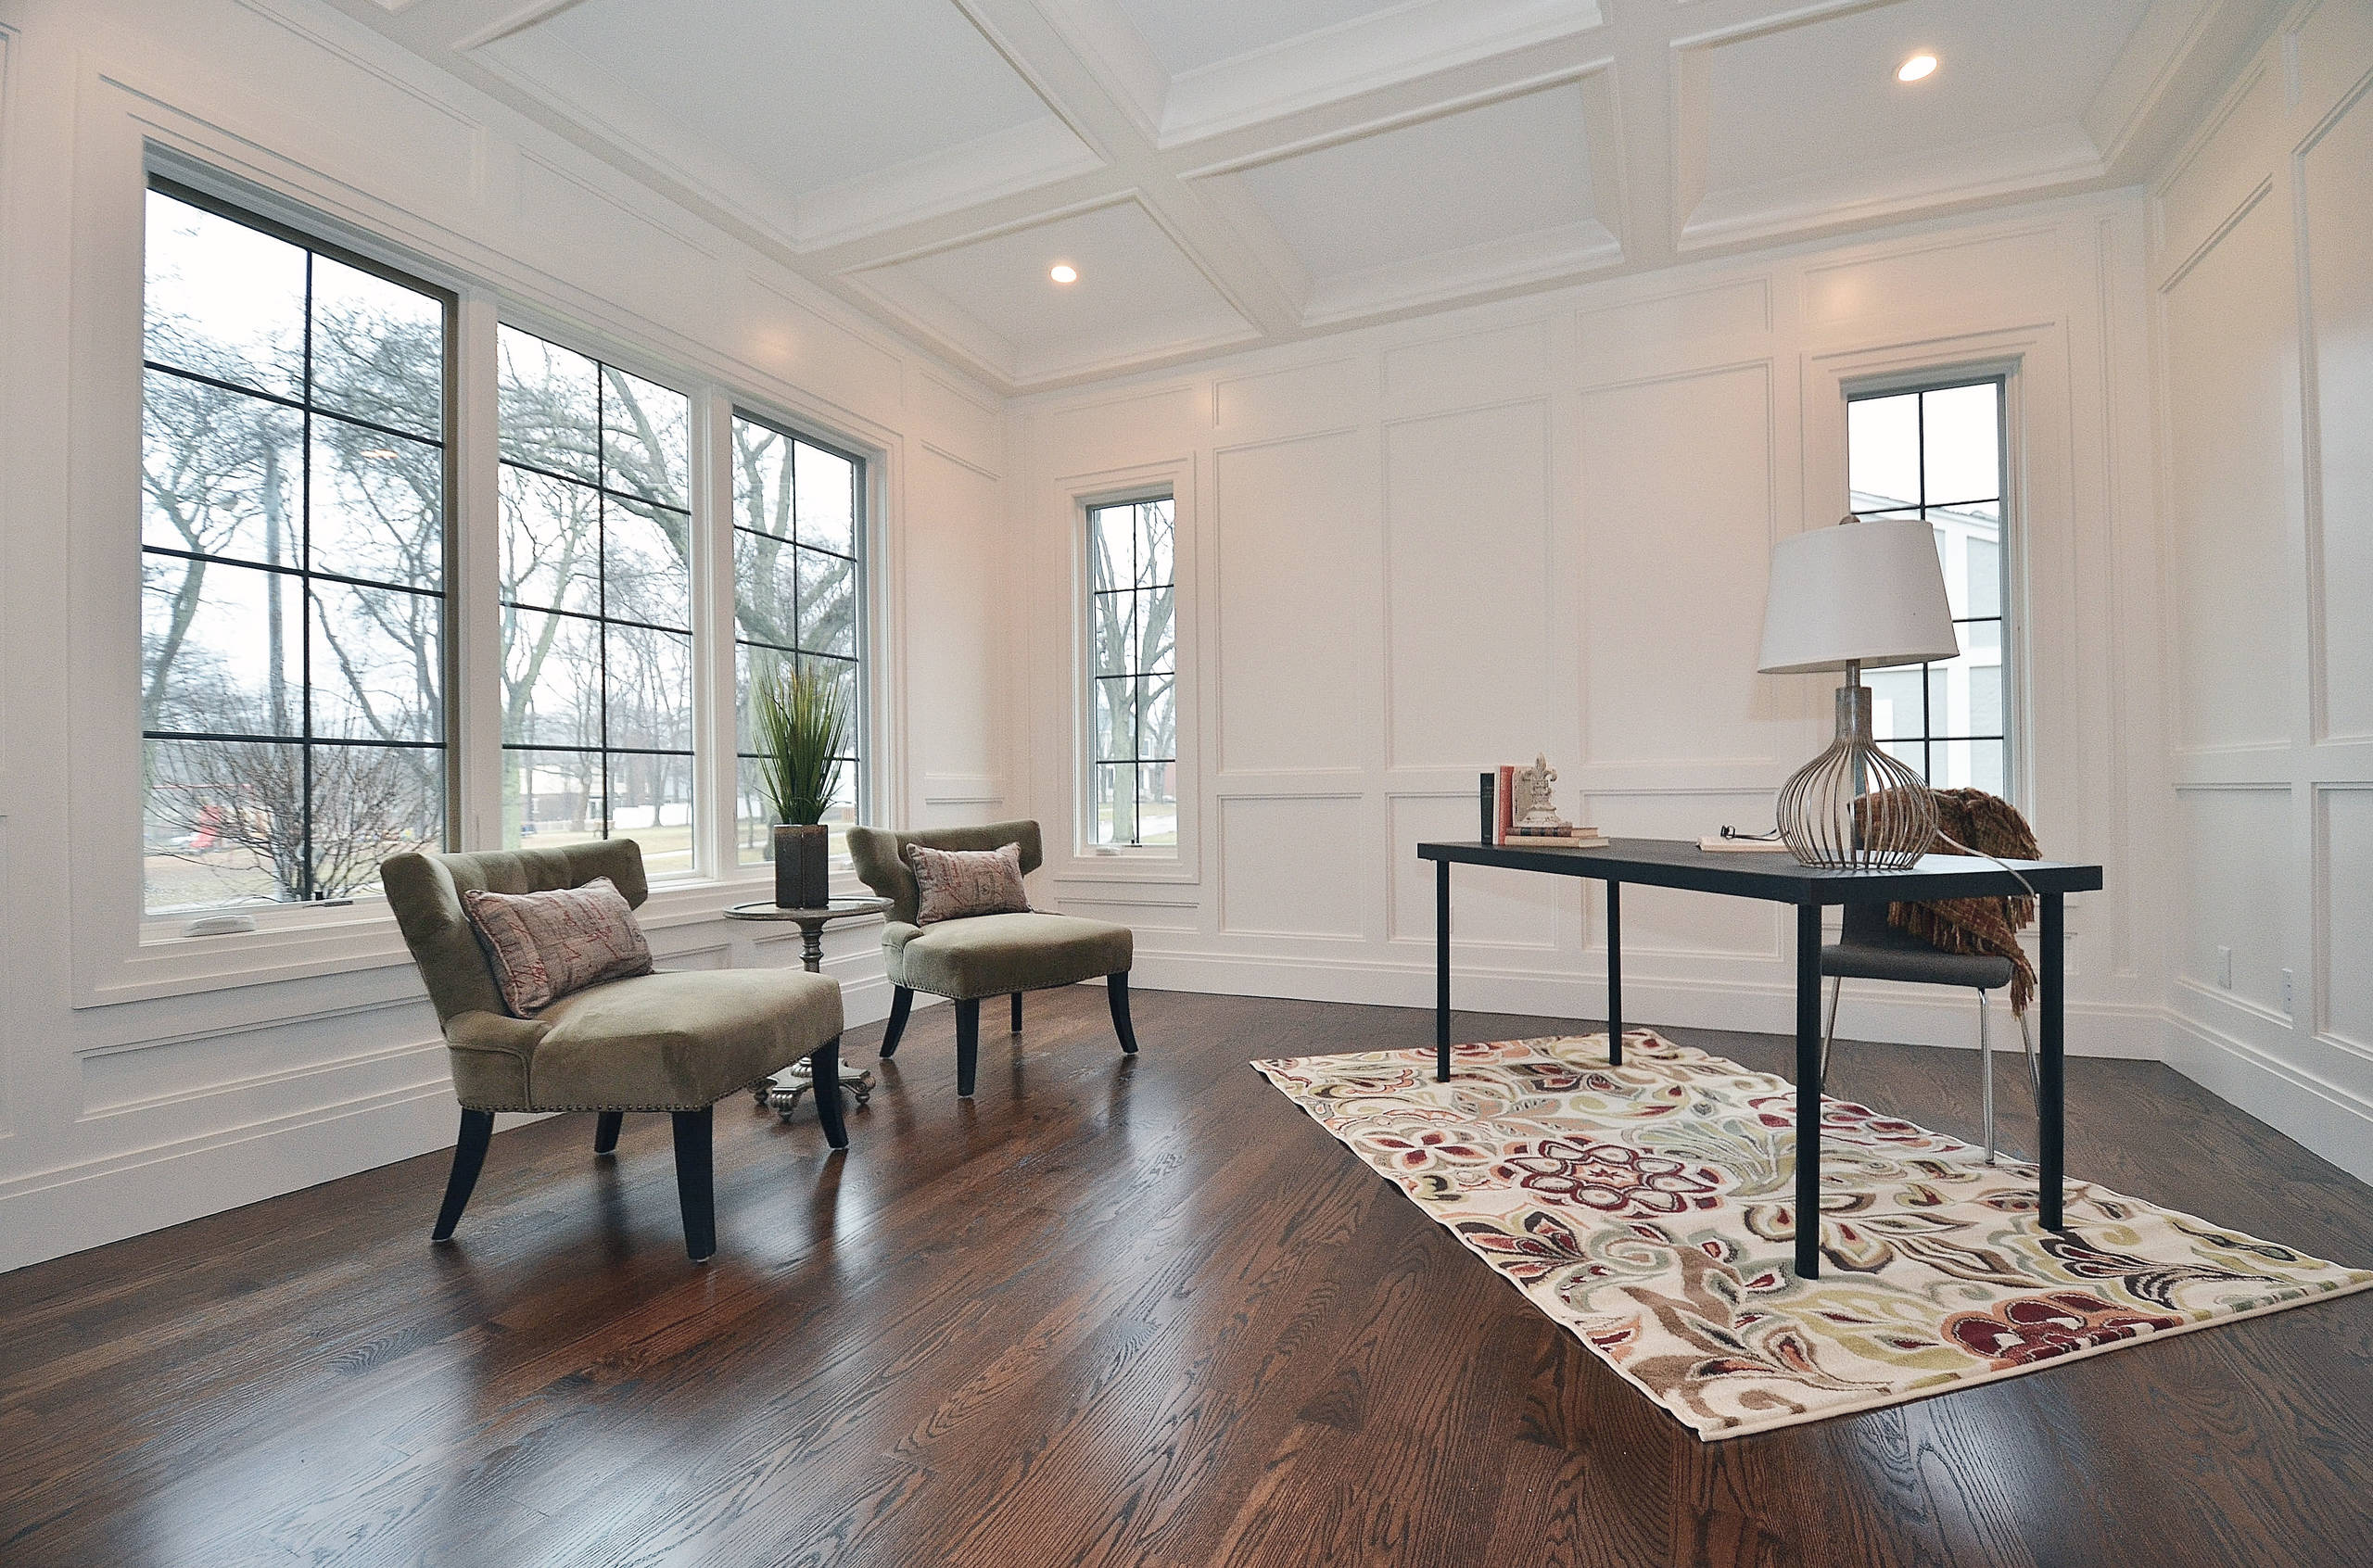 Stalburg Design provided all of the cabinet design, interior selections and custom details for this 5 bedroom, 6 bathroom spec home in downtown Birmingham, Michigan. Working within our builder's budge